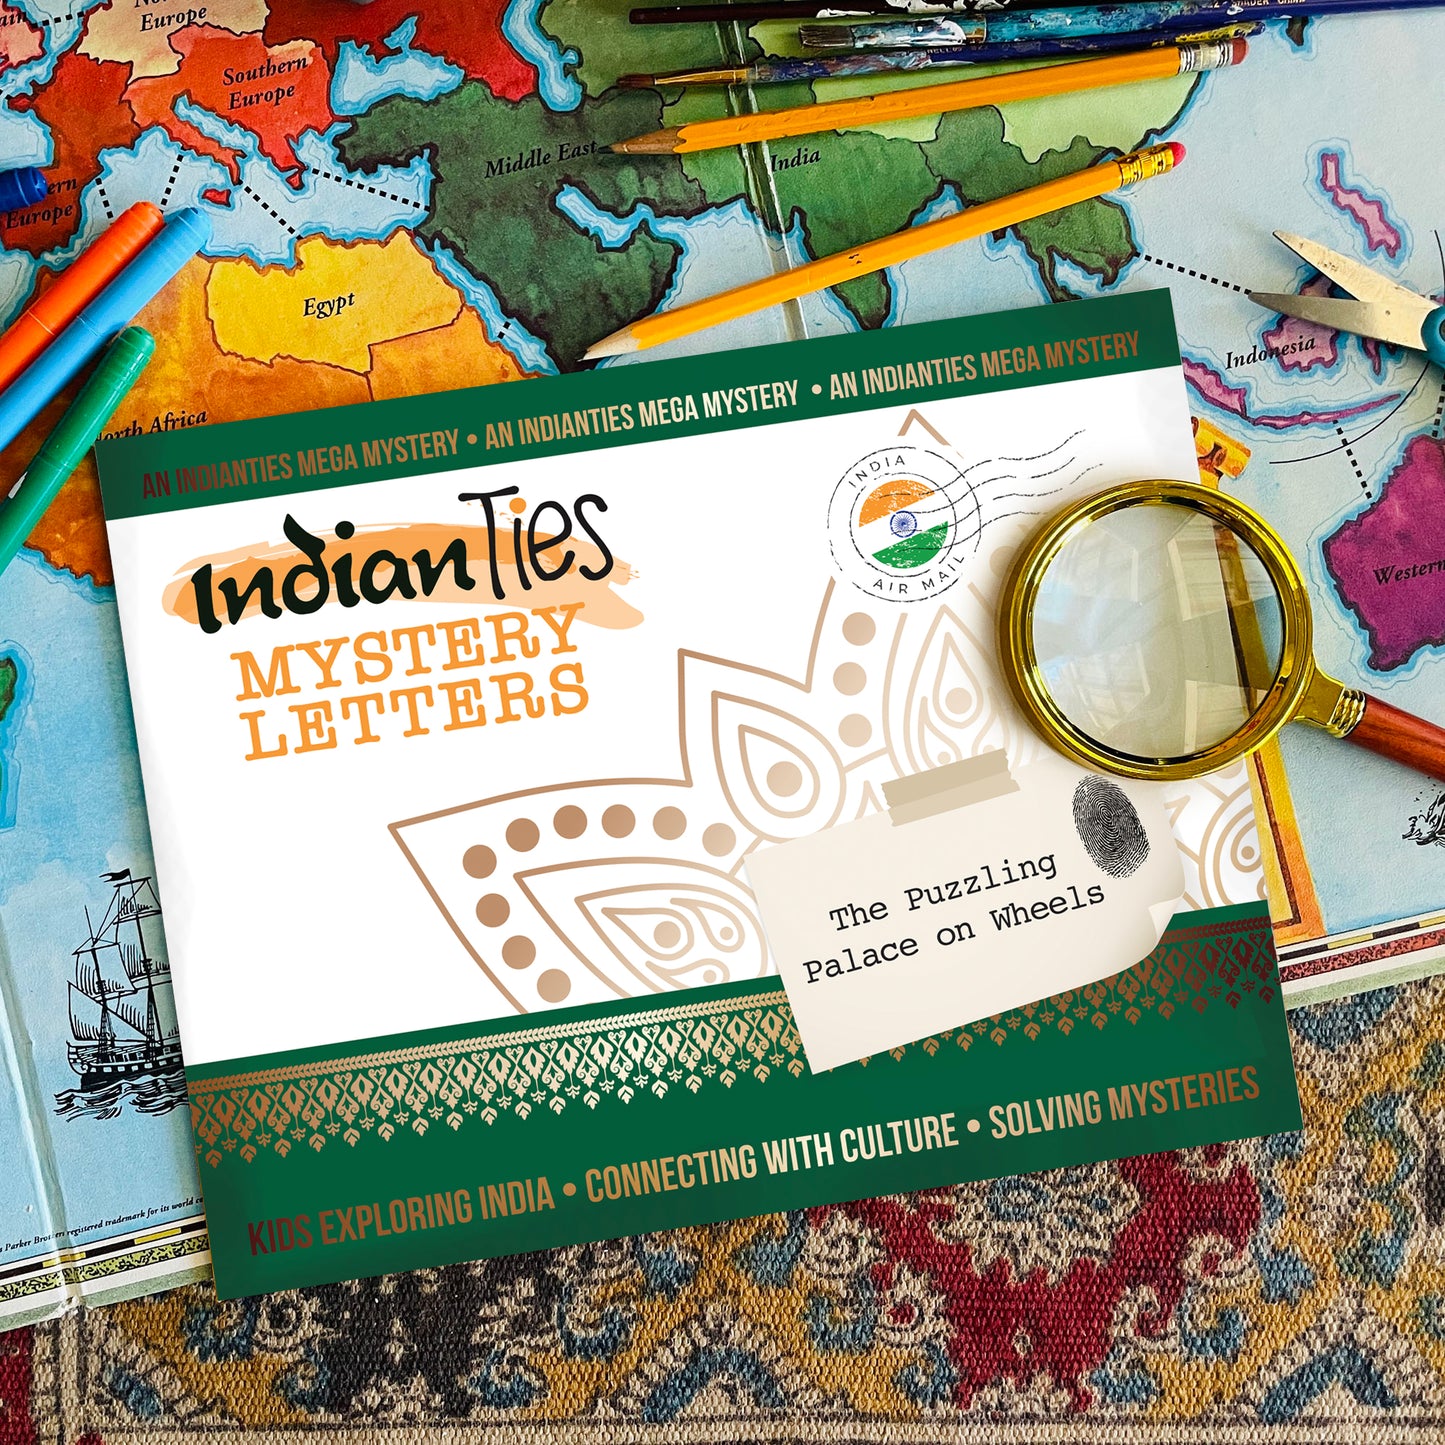 IndianTies Mega Mystery The Puzzling Palace on Wheels